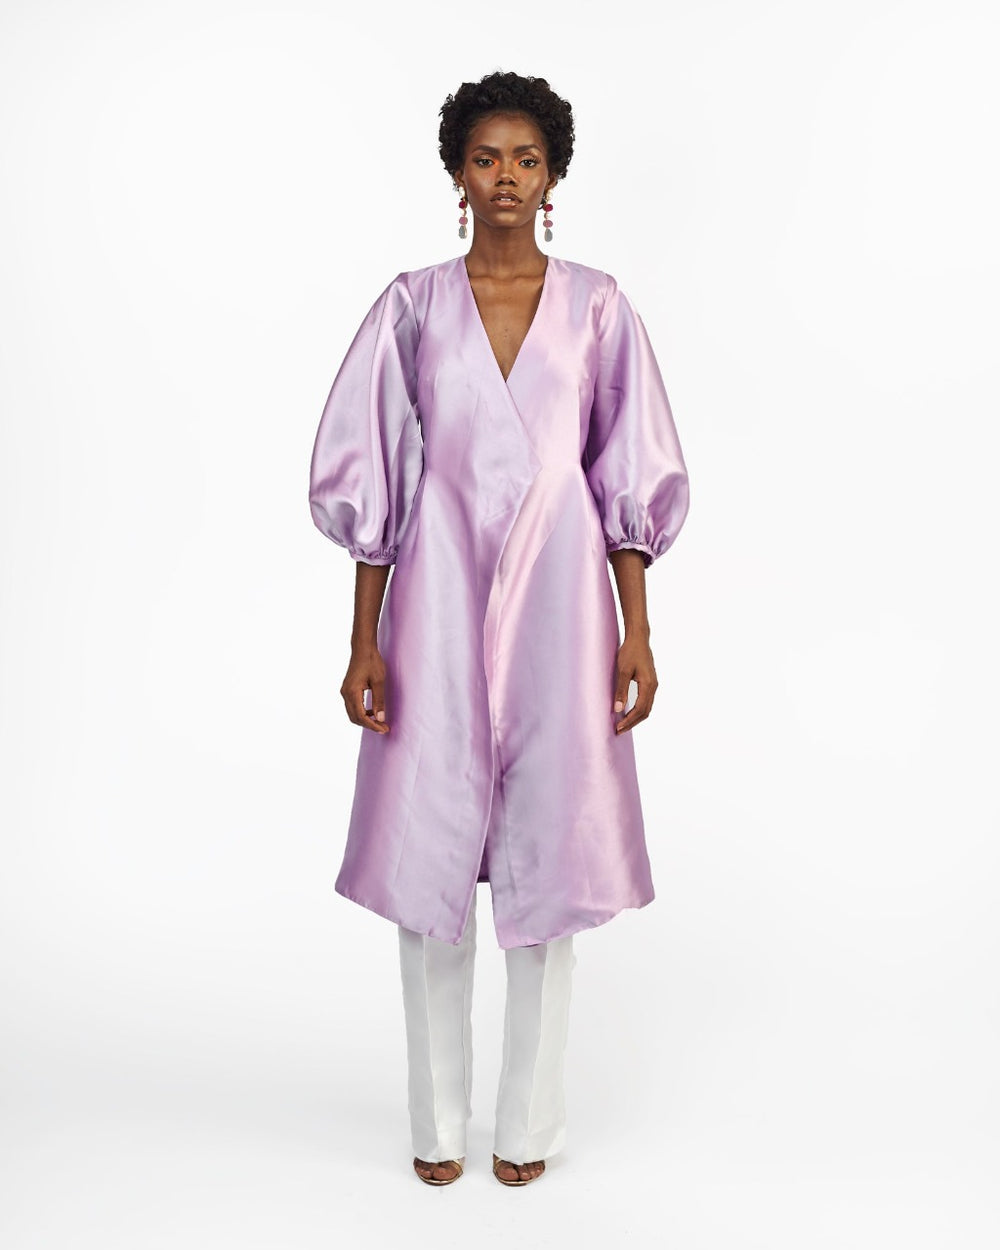 A model in a Lilac silk satin jacket with puff sleeve and a White straight-cut pant in a white room